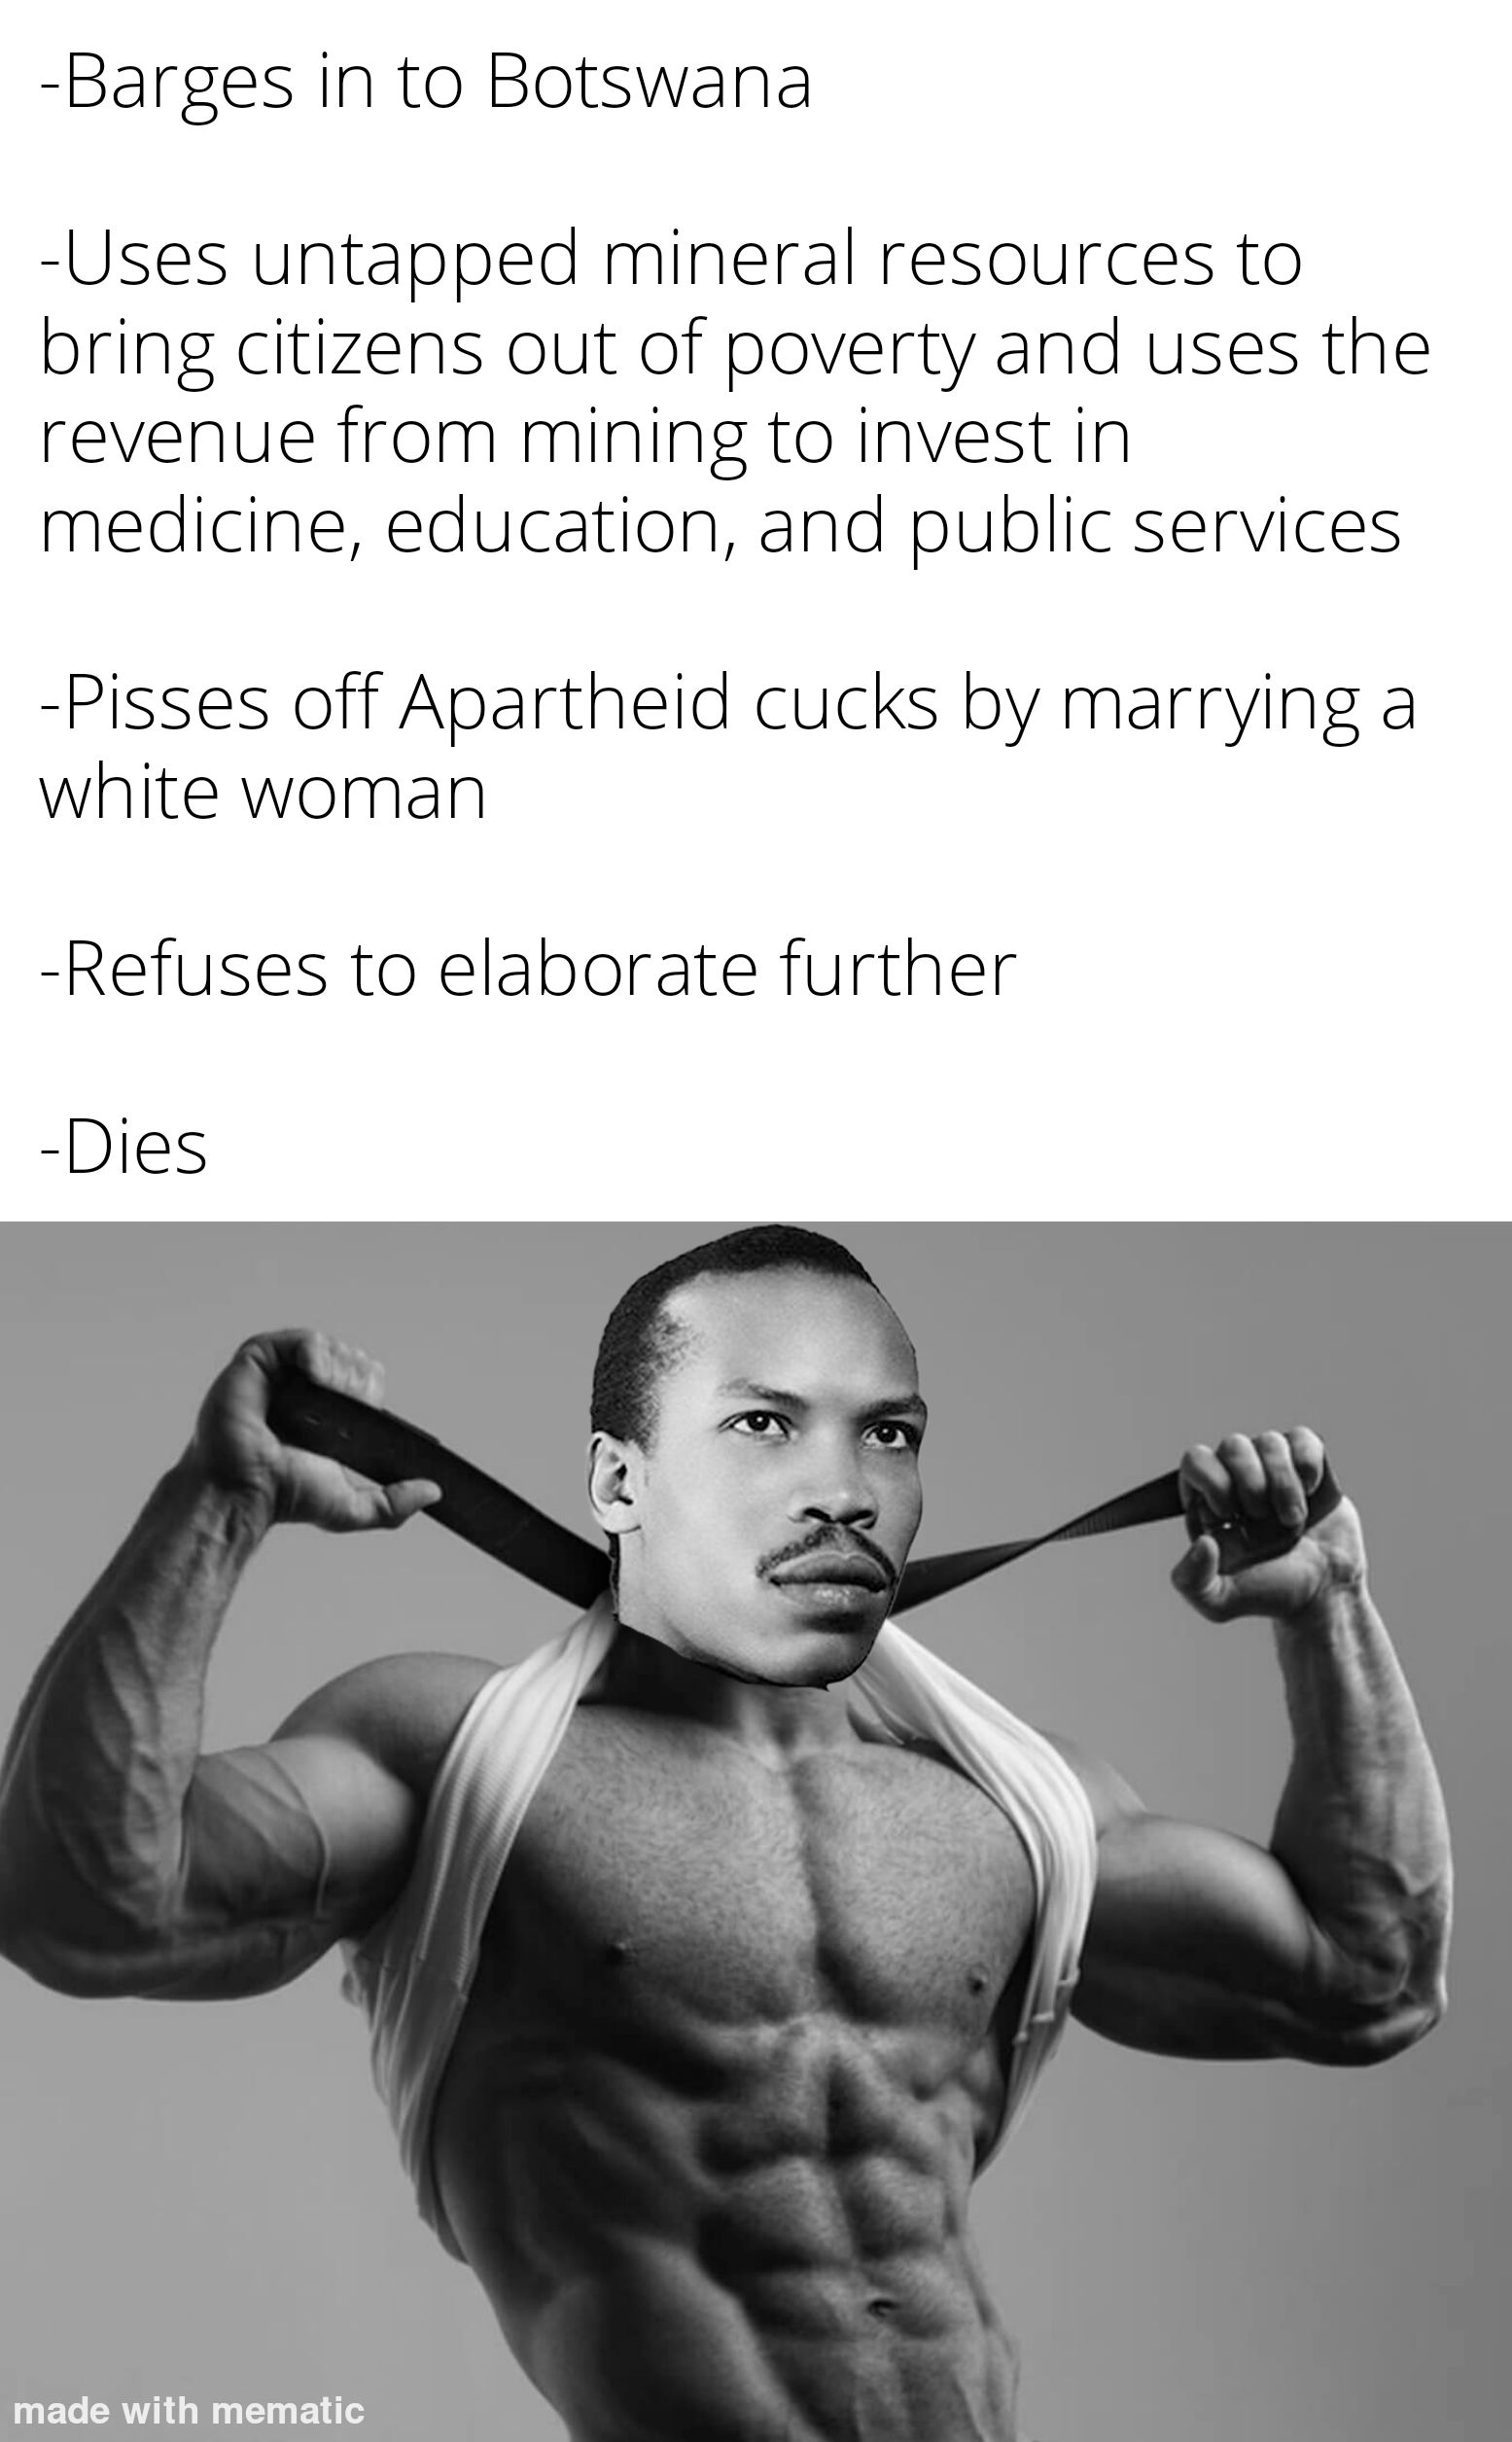 Posting African history memes every day for a month day 5 but it's actually day 5